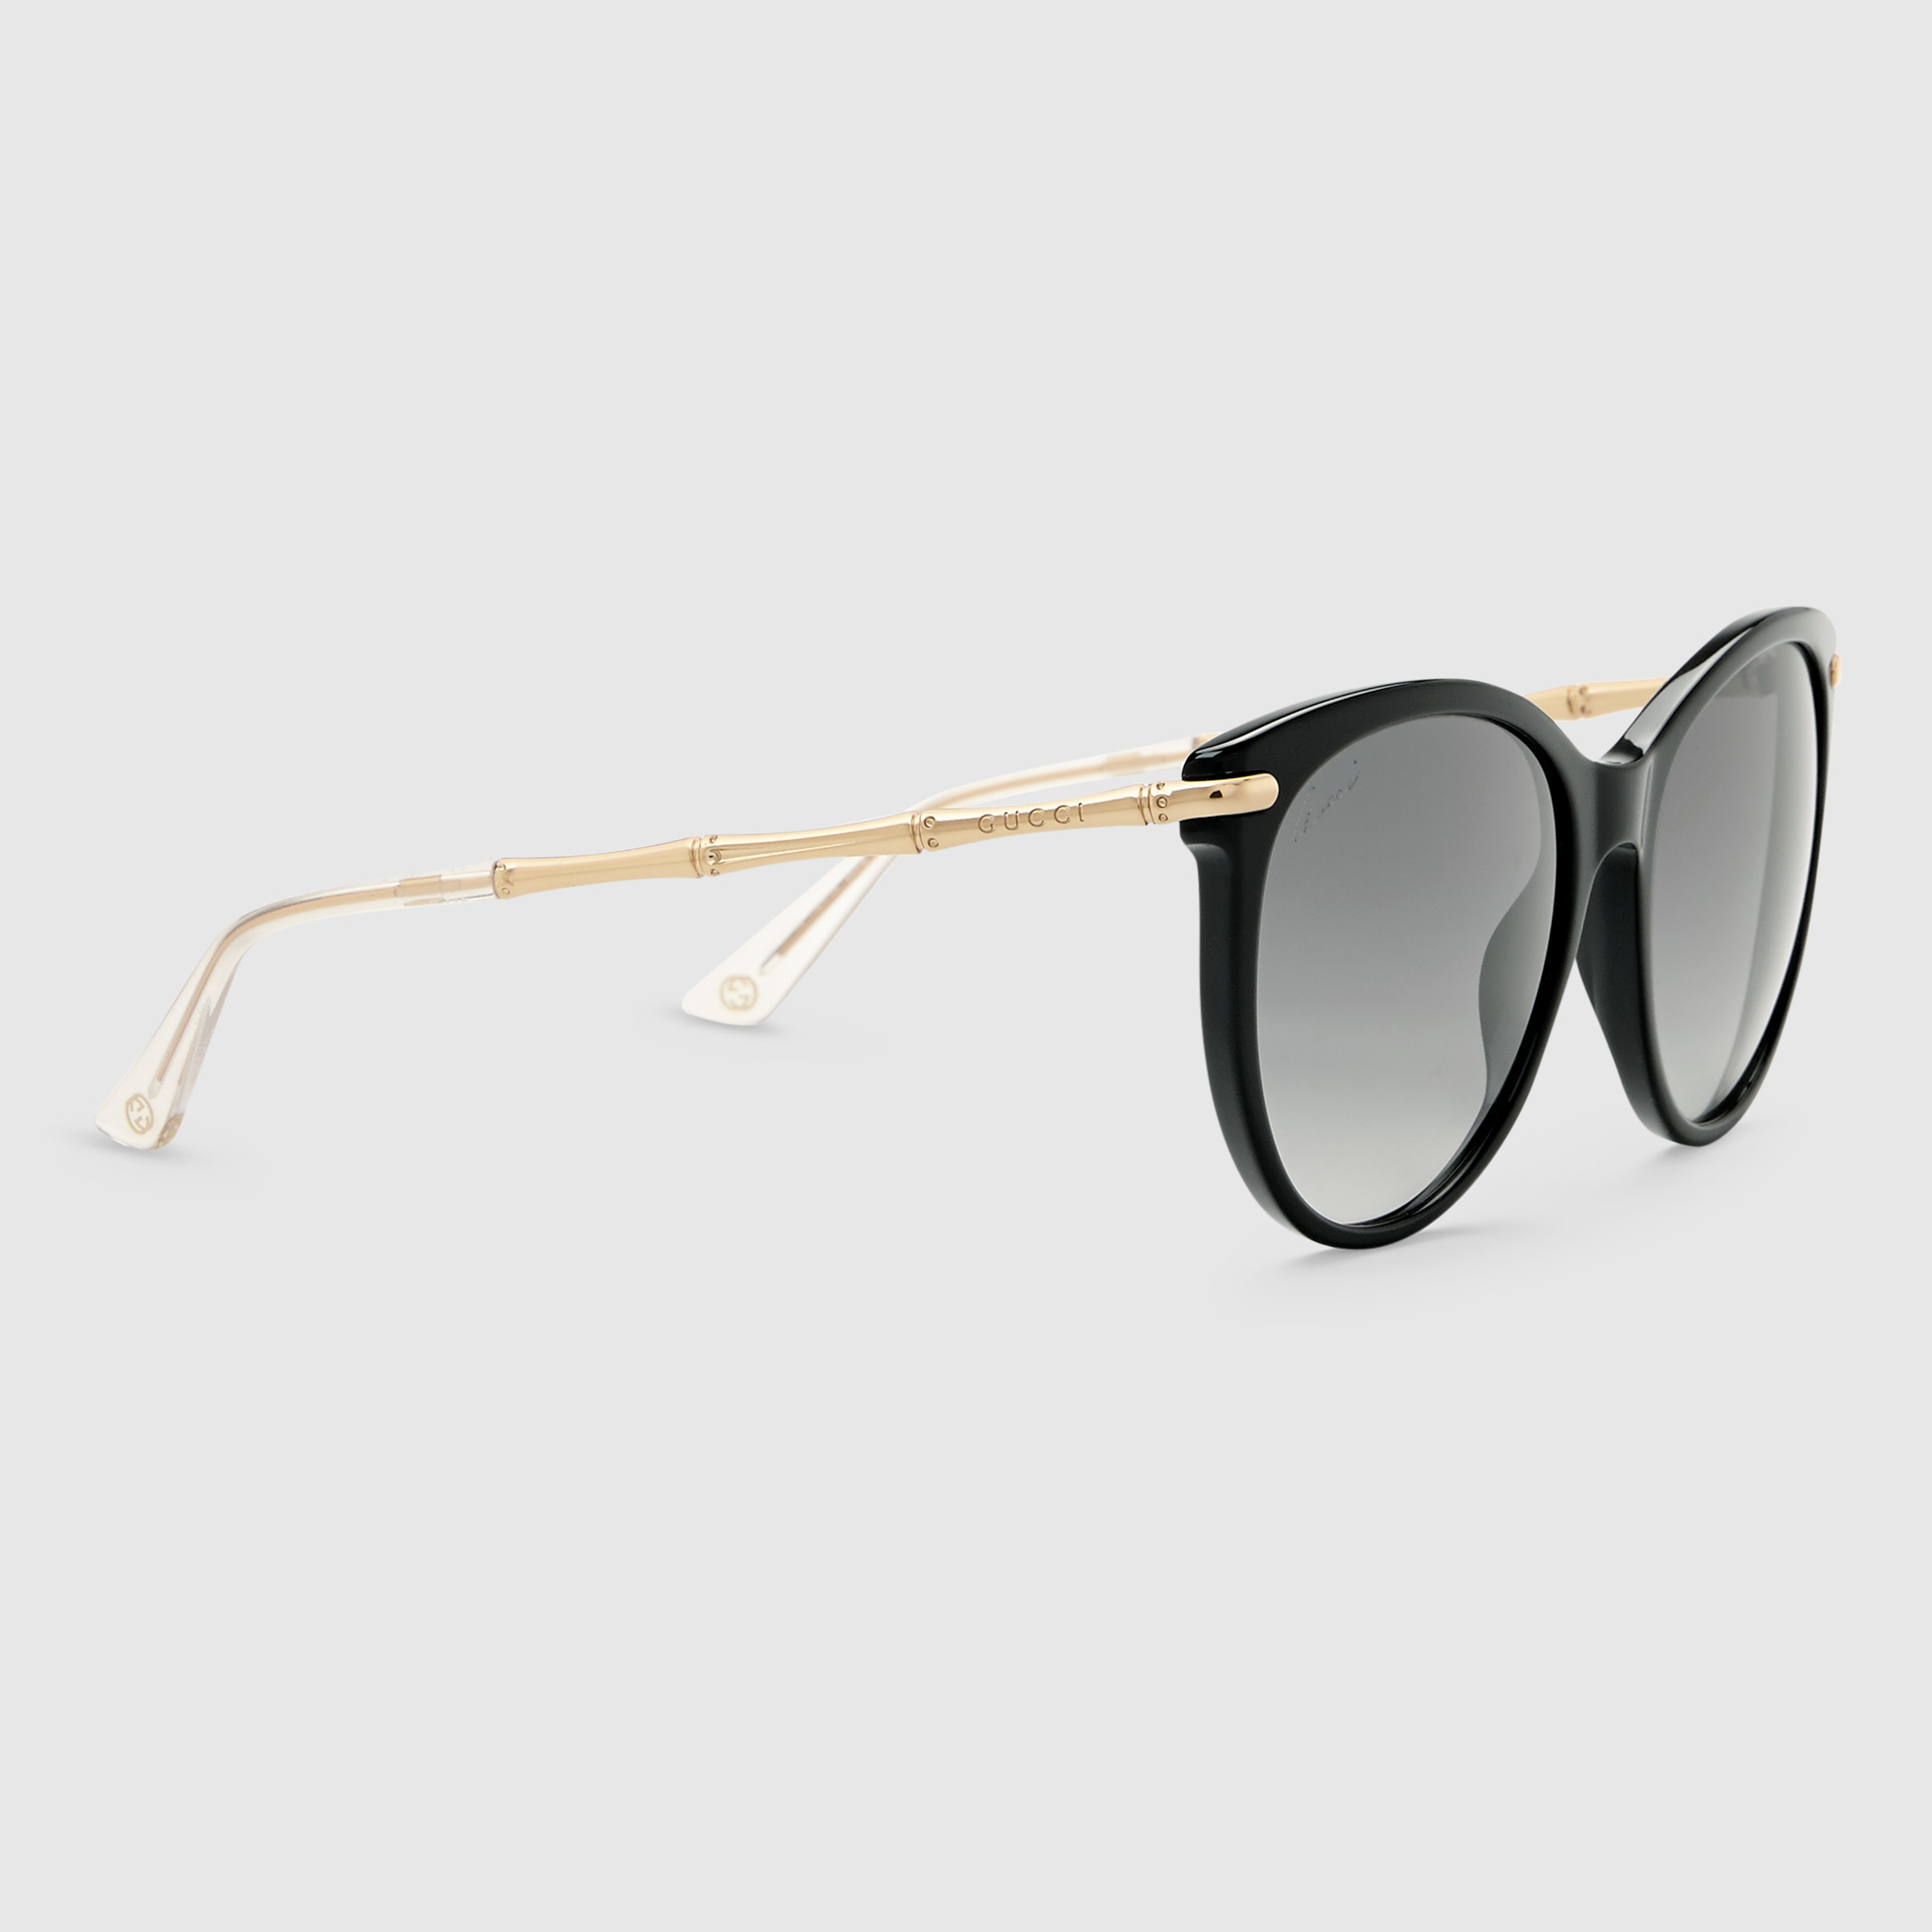 gucci sunglasses with bamboo detail